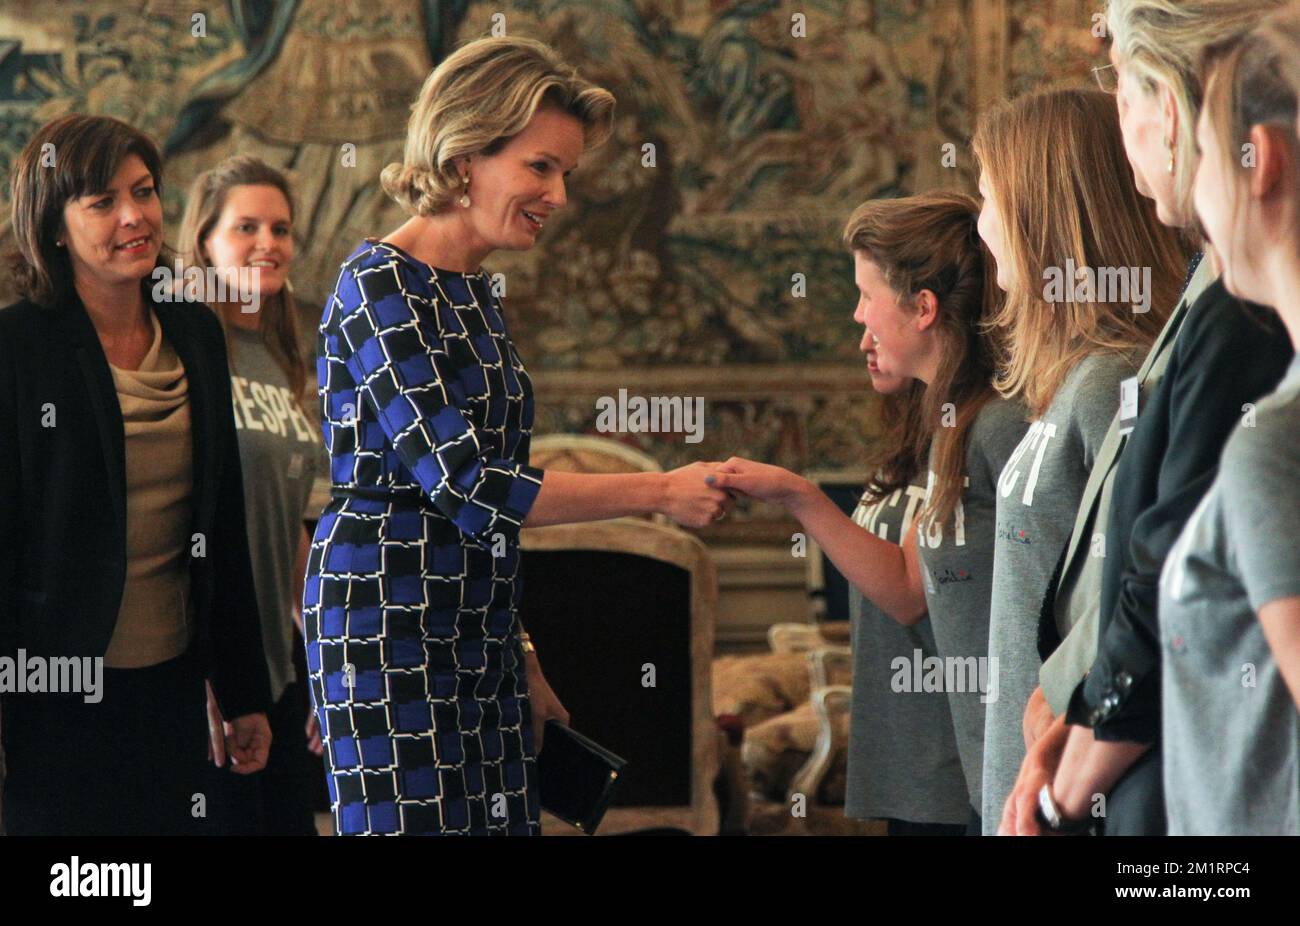 Vice-Prime Minister and Interior Minister Joelle Milquet and Queen Mathilde of Belgium pictured during an International Conference at the occasion of the 65th anniversary of the New York convention, organised by Belgium and France to gather the European Union who signed the convention, in Egmont Palace, in Brussels, Monday 30 September 2013. Stock Photo